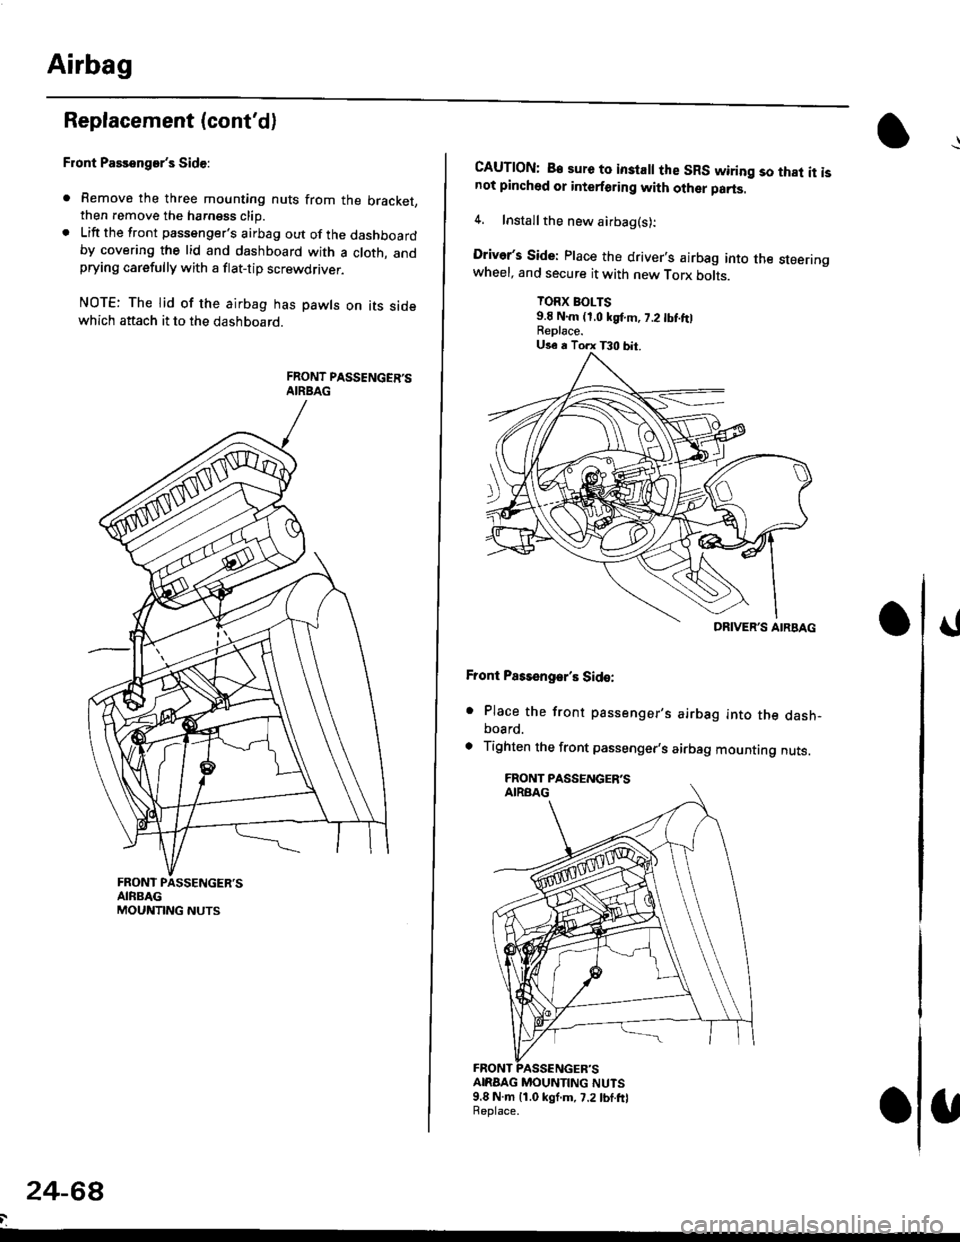 HONDA CIVIC 2000 6.G Owners Guide Airbag
Replacement (contd)
Front Passengers Side:
. Remove the three mounting nuts from the bracket,then remove the harngss clip.. Lift the front passengers airbag out of the dashboardby covering t